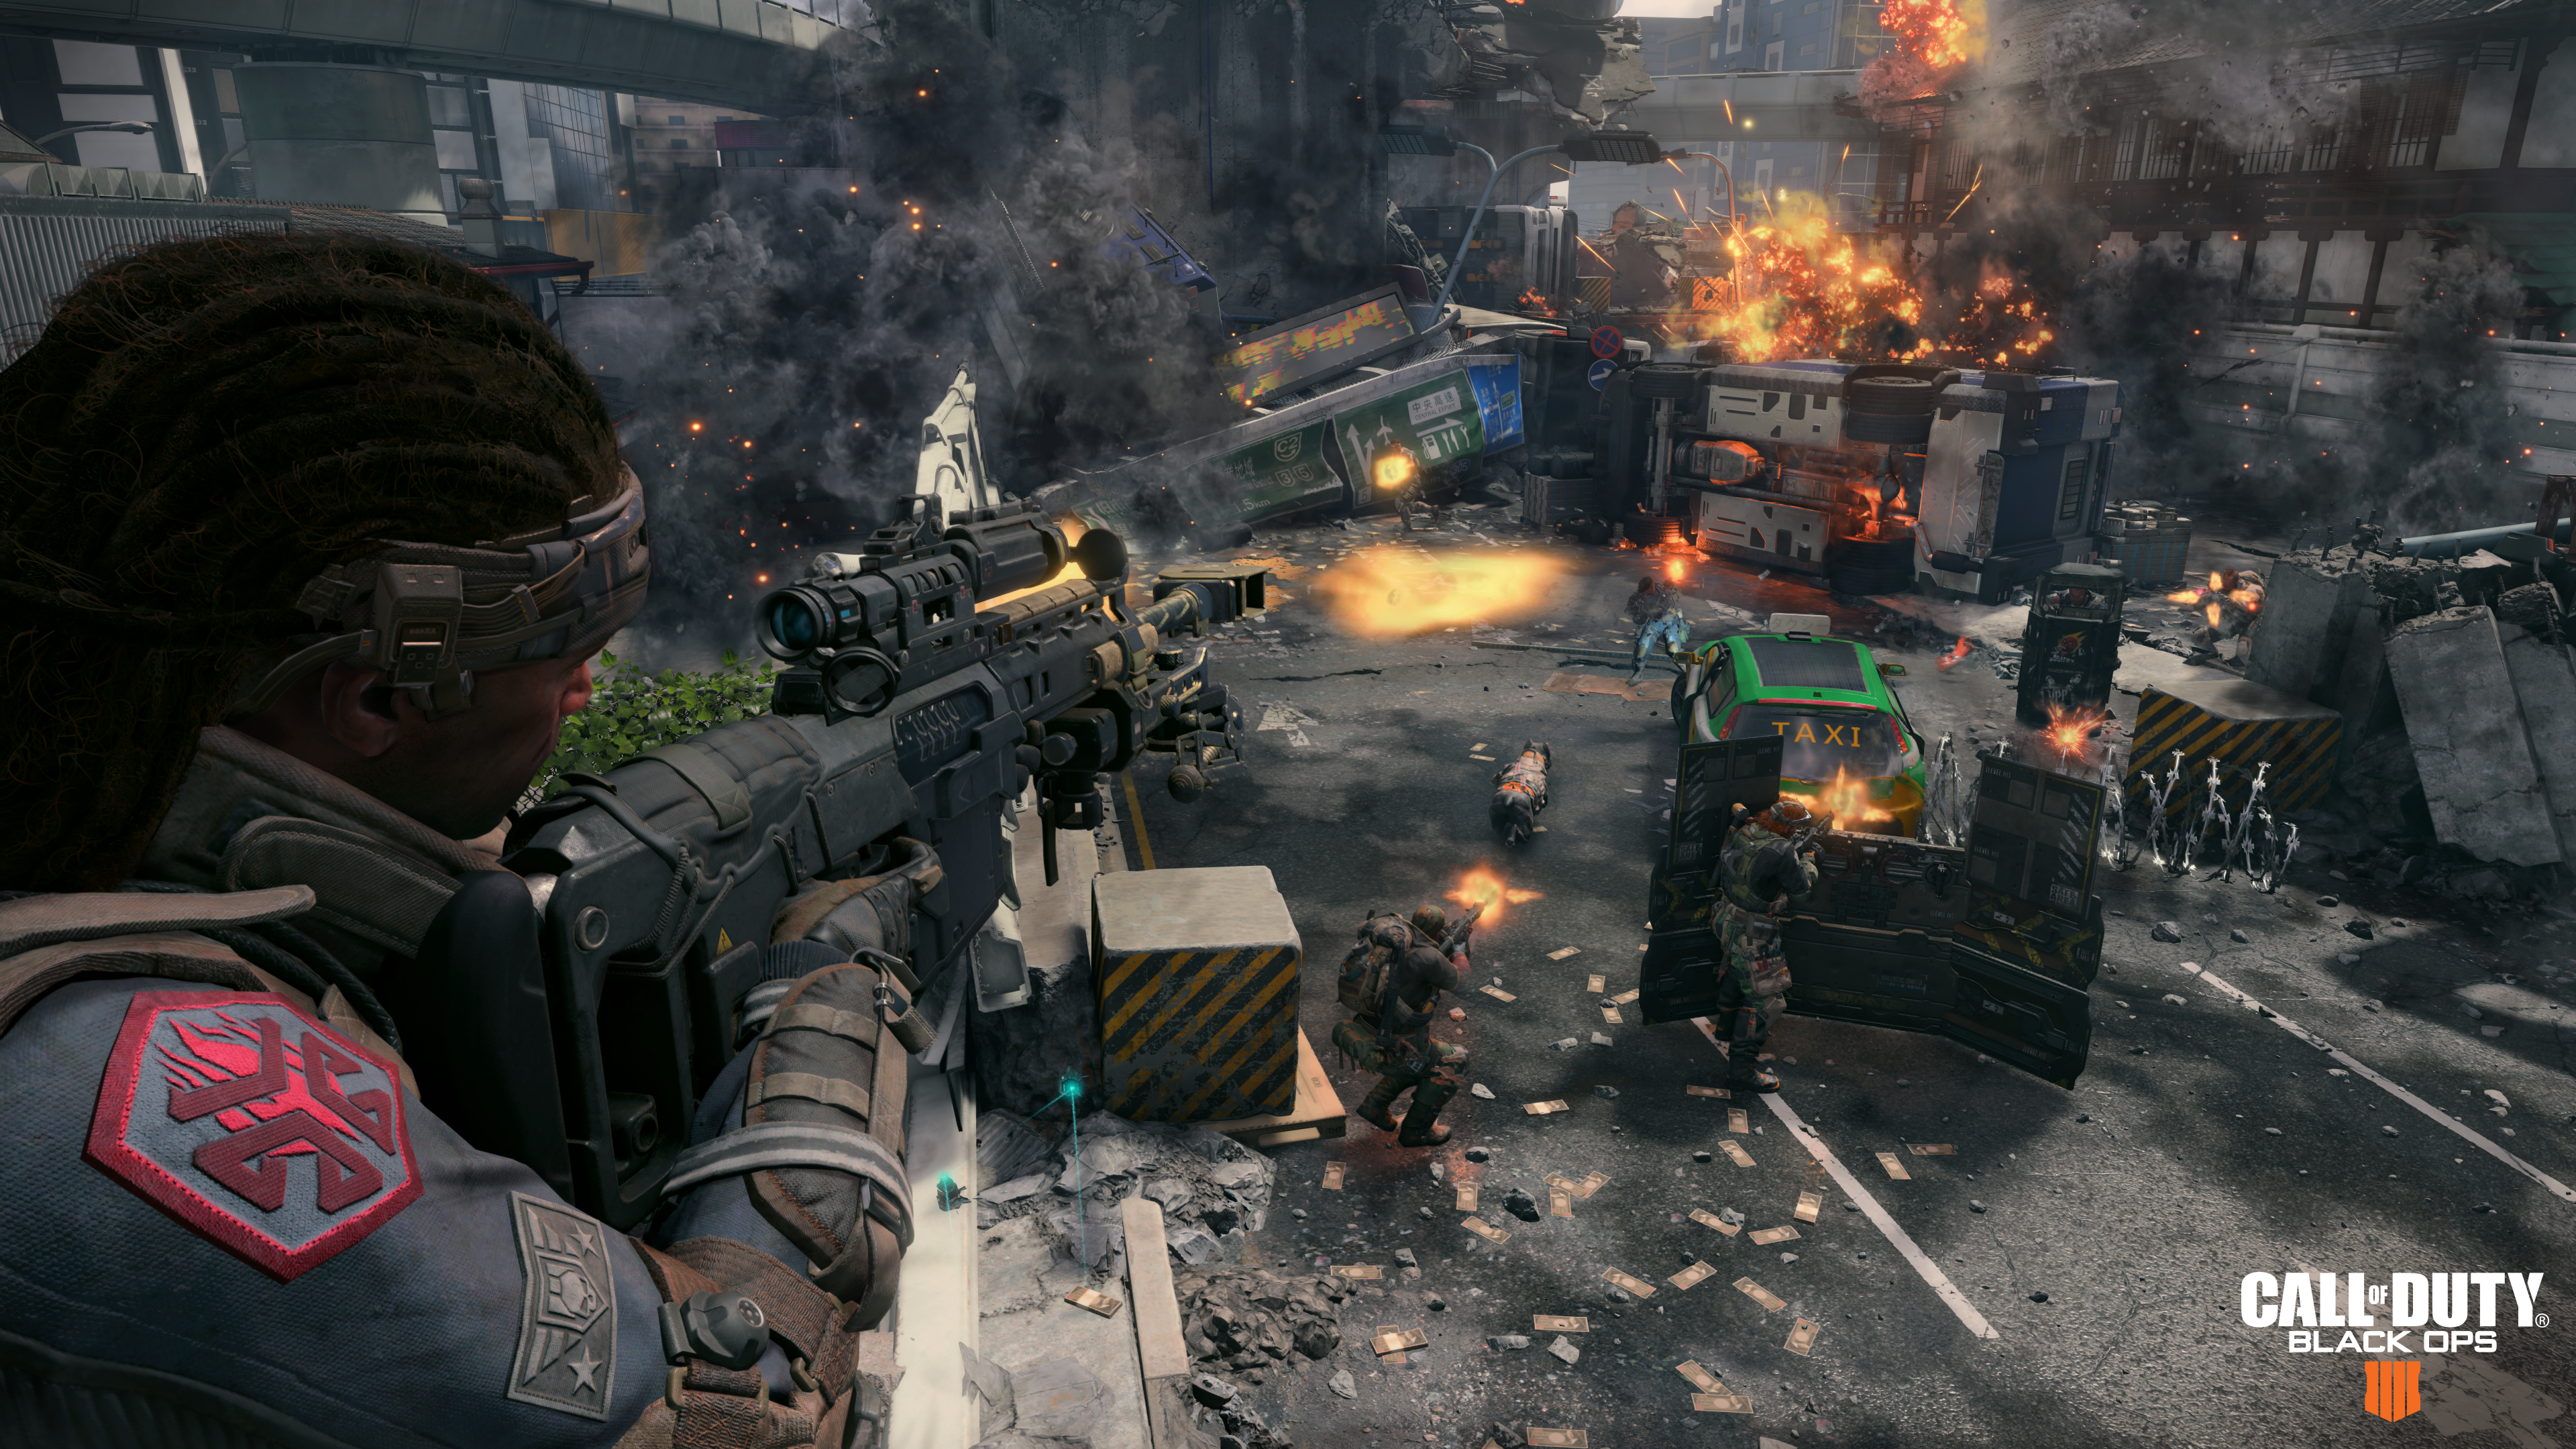 Call Of Duty: Black Ops 4 Multiplayer Beta screencap (Activision/Treyarch)